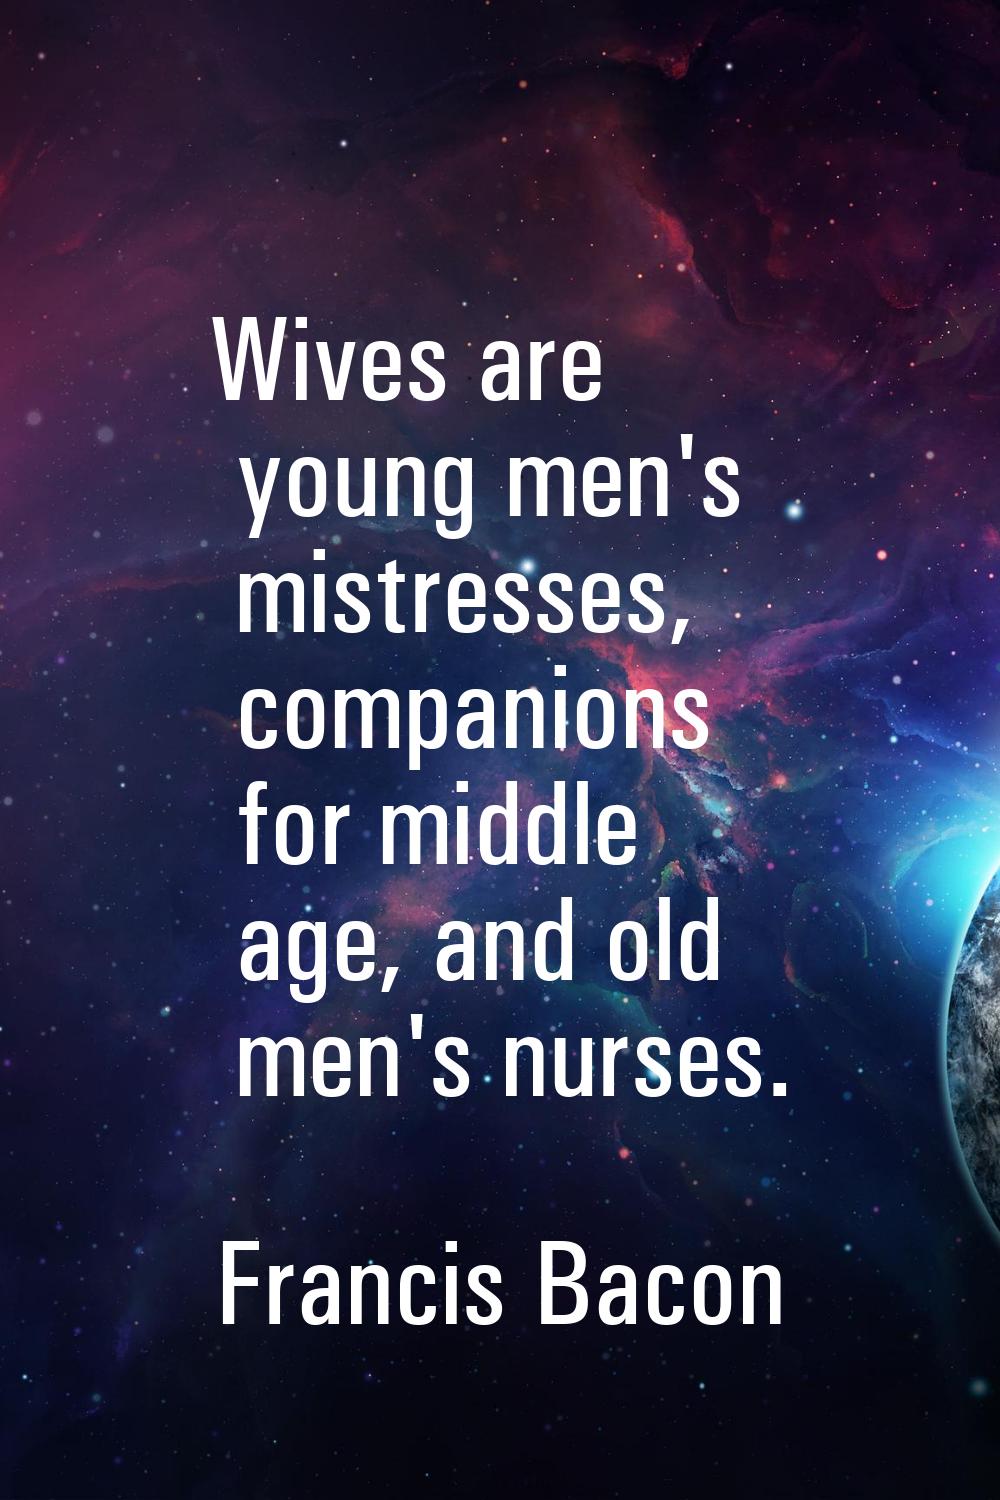 Wives are young men's mistresses, companions for middle age, and old men's nurses.